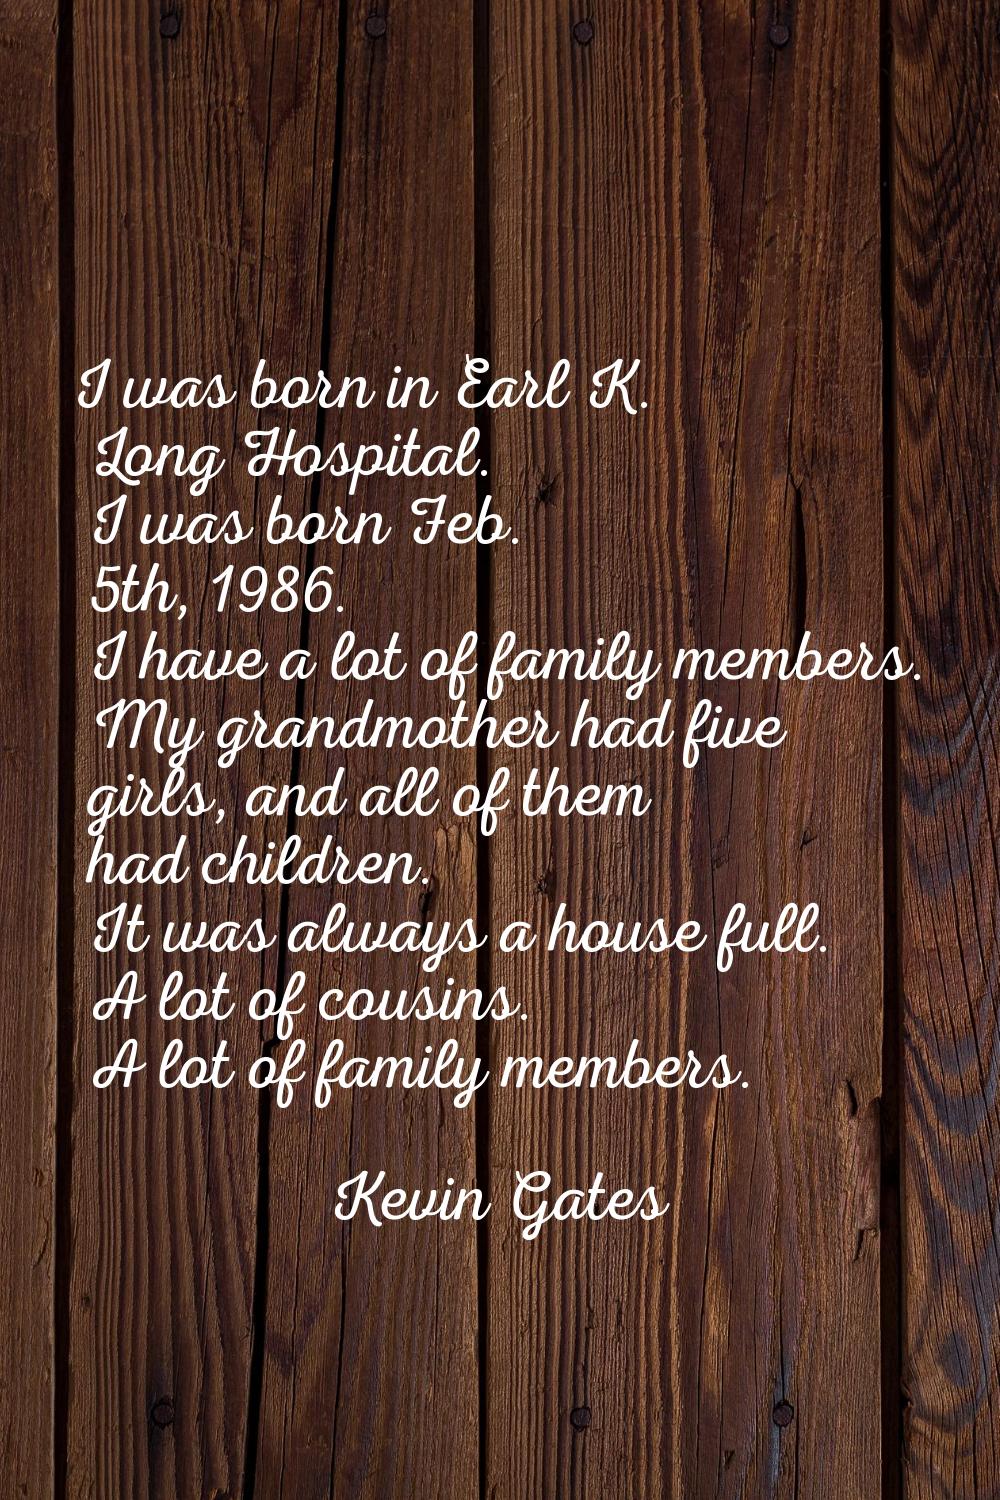 I was born in Earl K. Long Hospital. I was born Feb. 5th, 1986. I have a lot of family members. My 